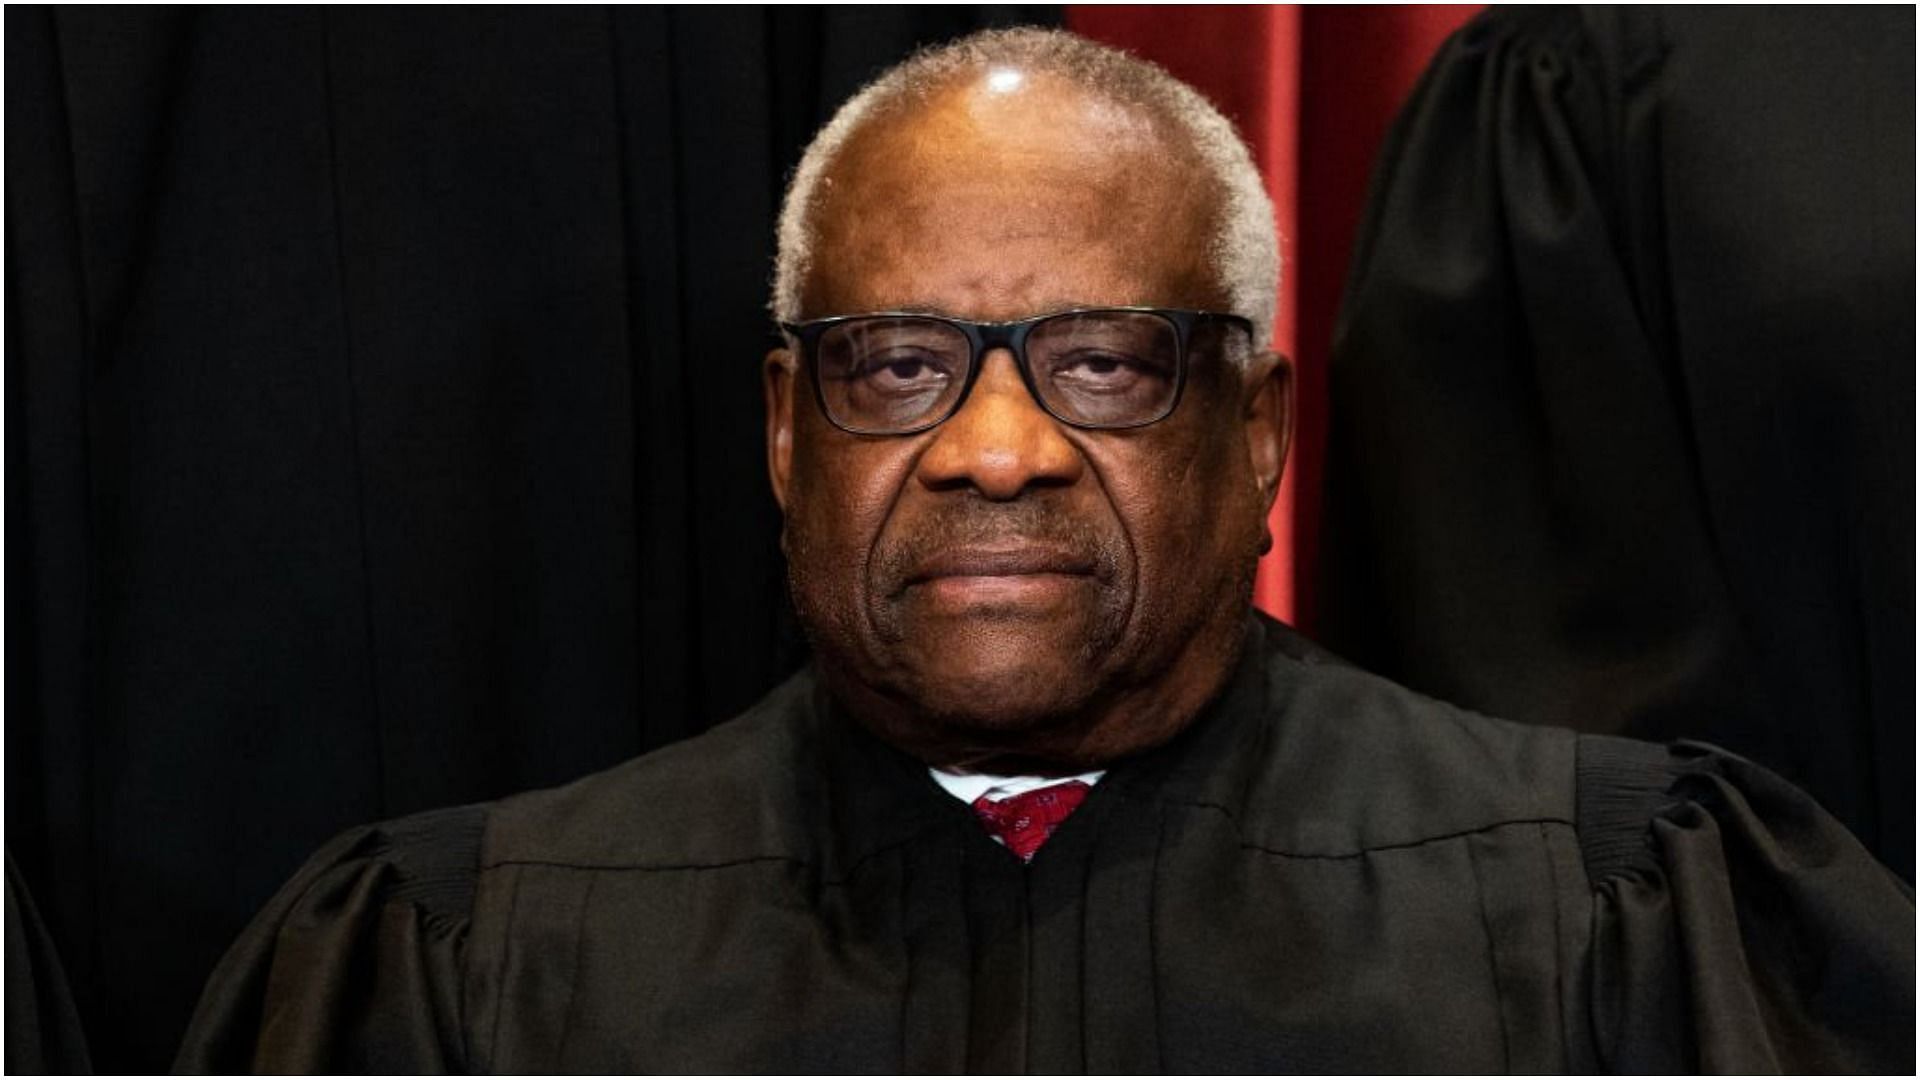 Justice Clarence Thomas in a group photo of the Supreme Court justices (Image via Getty Images/Erin Schaff-Pool)